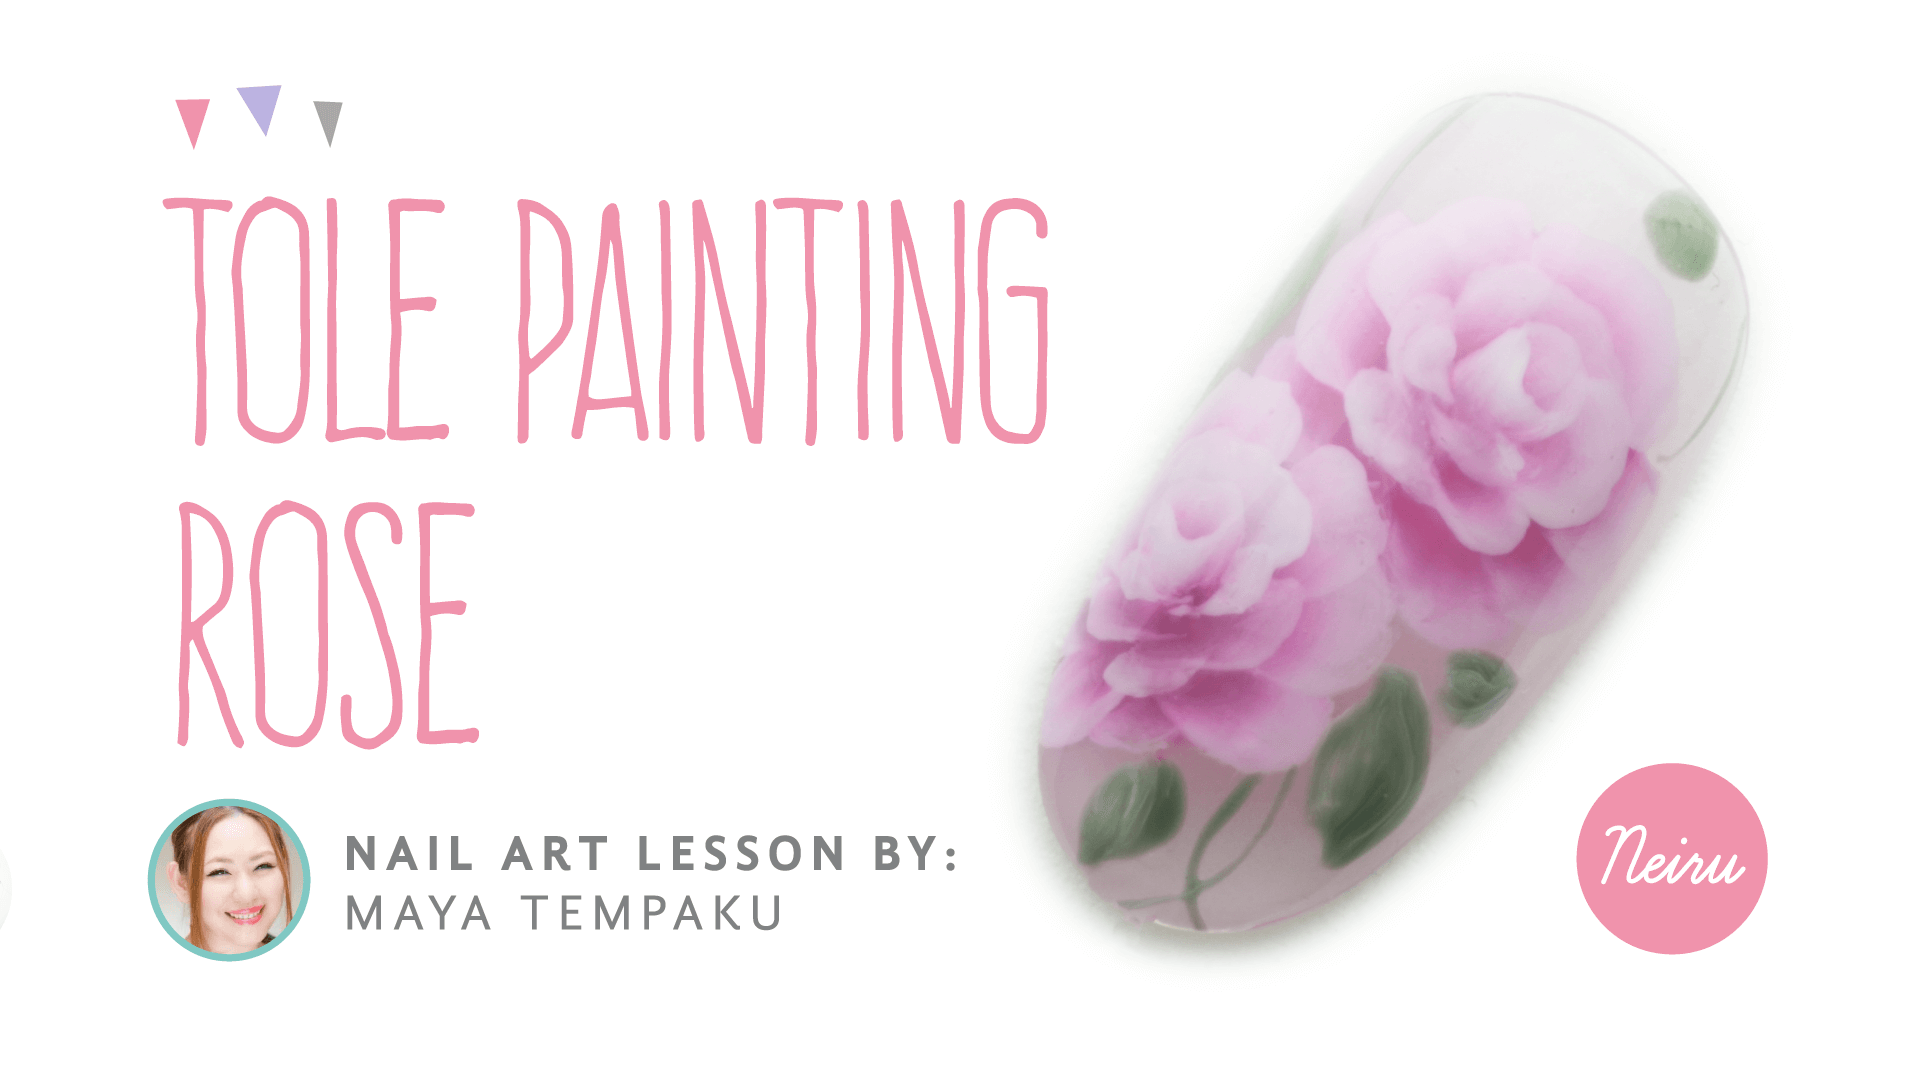 tole_painting_rose_cover